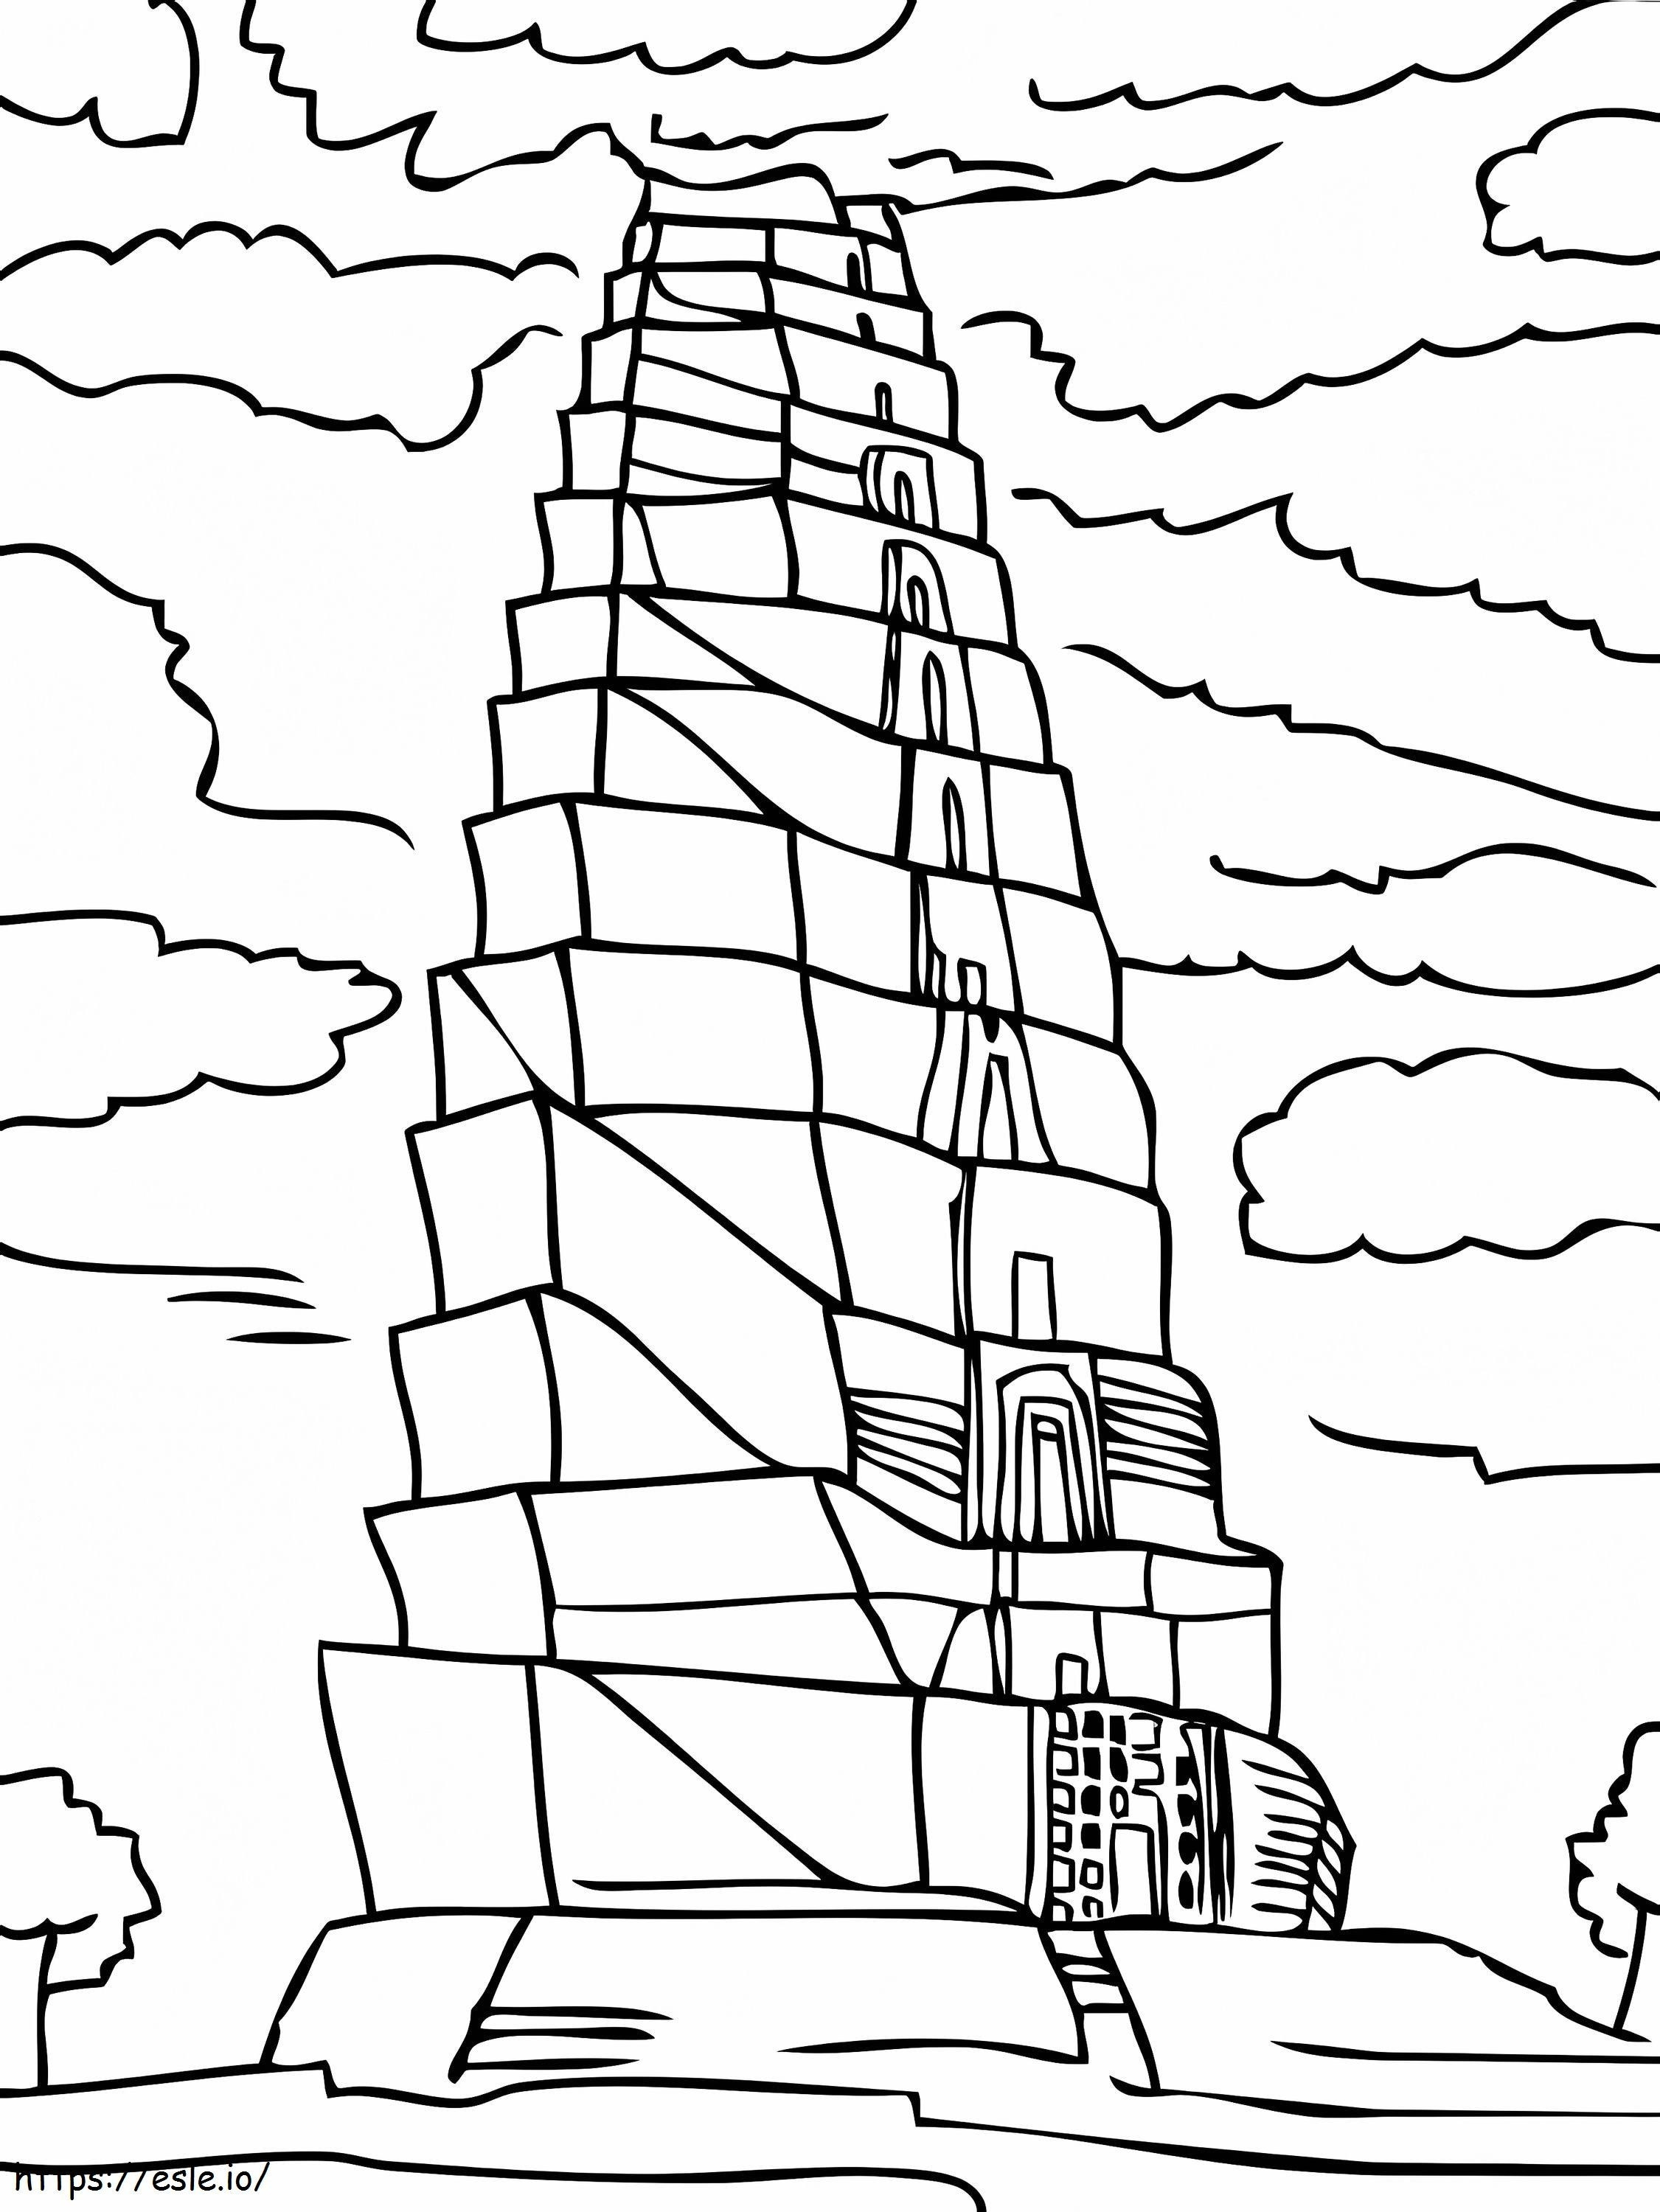 Tower Of Babel 6 coloring page